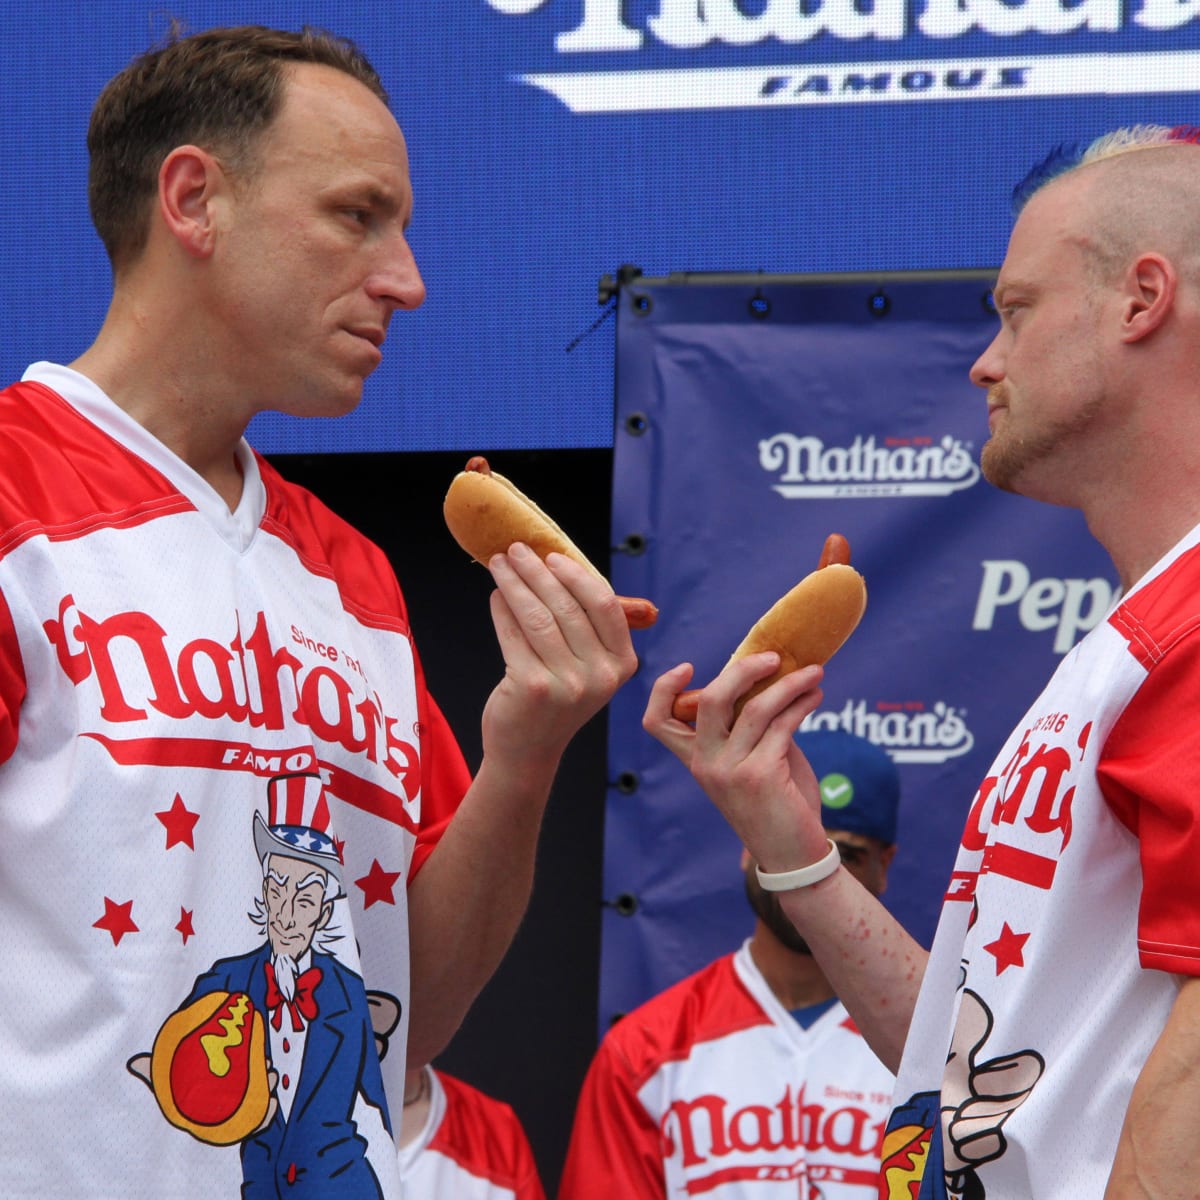 Happy National Hot Dog Day! 🌭 Come watch Joey Chestnut, Nick Wehry & some of your favorite competitive eaters from Nathan's Famous Hot Dog Eating Contest participate in the National Buffalo Wing Eating Contest this Labor Day Weekend!